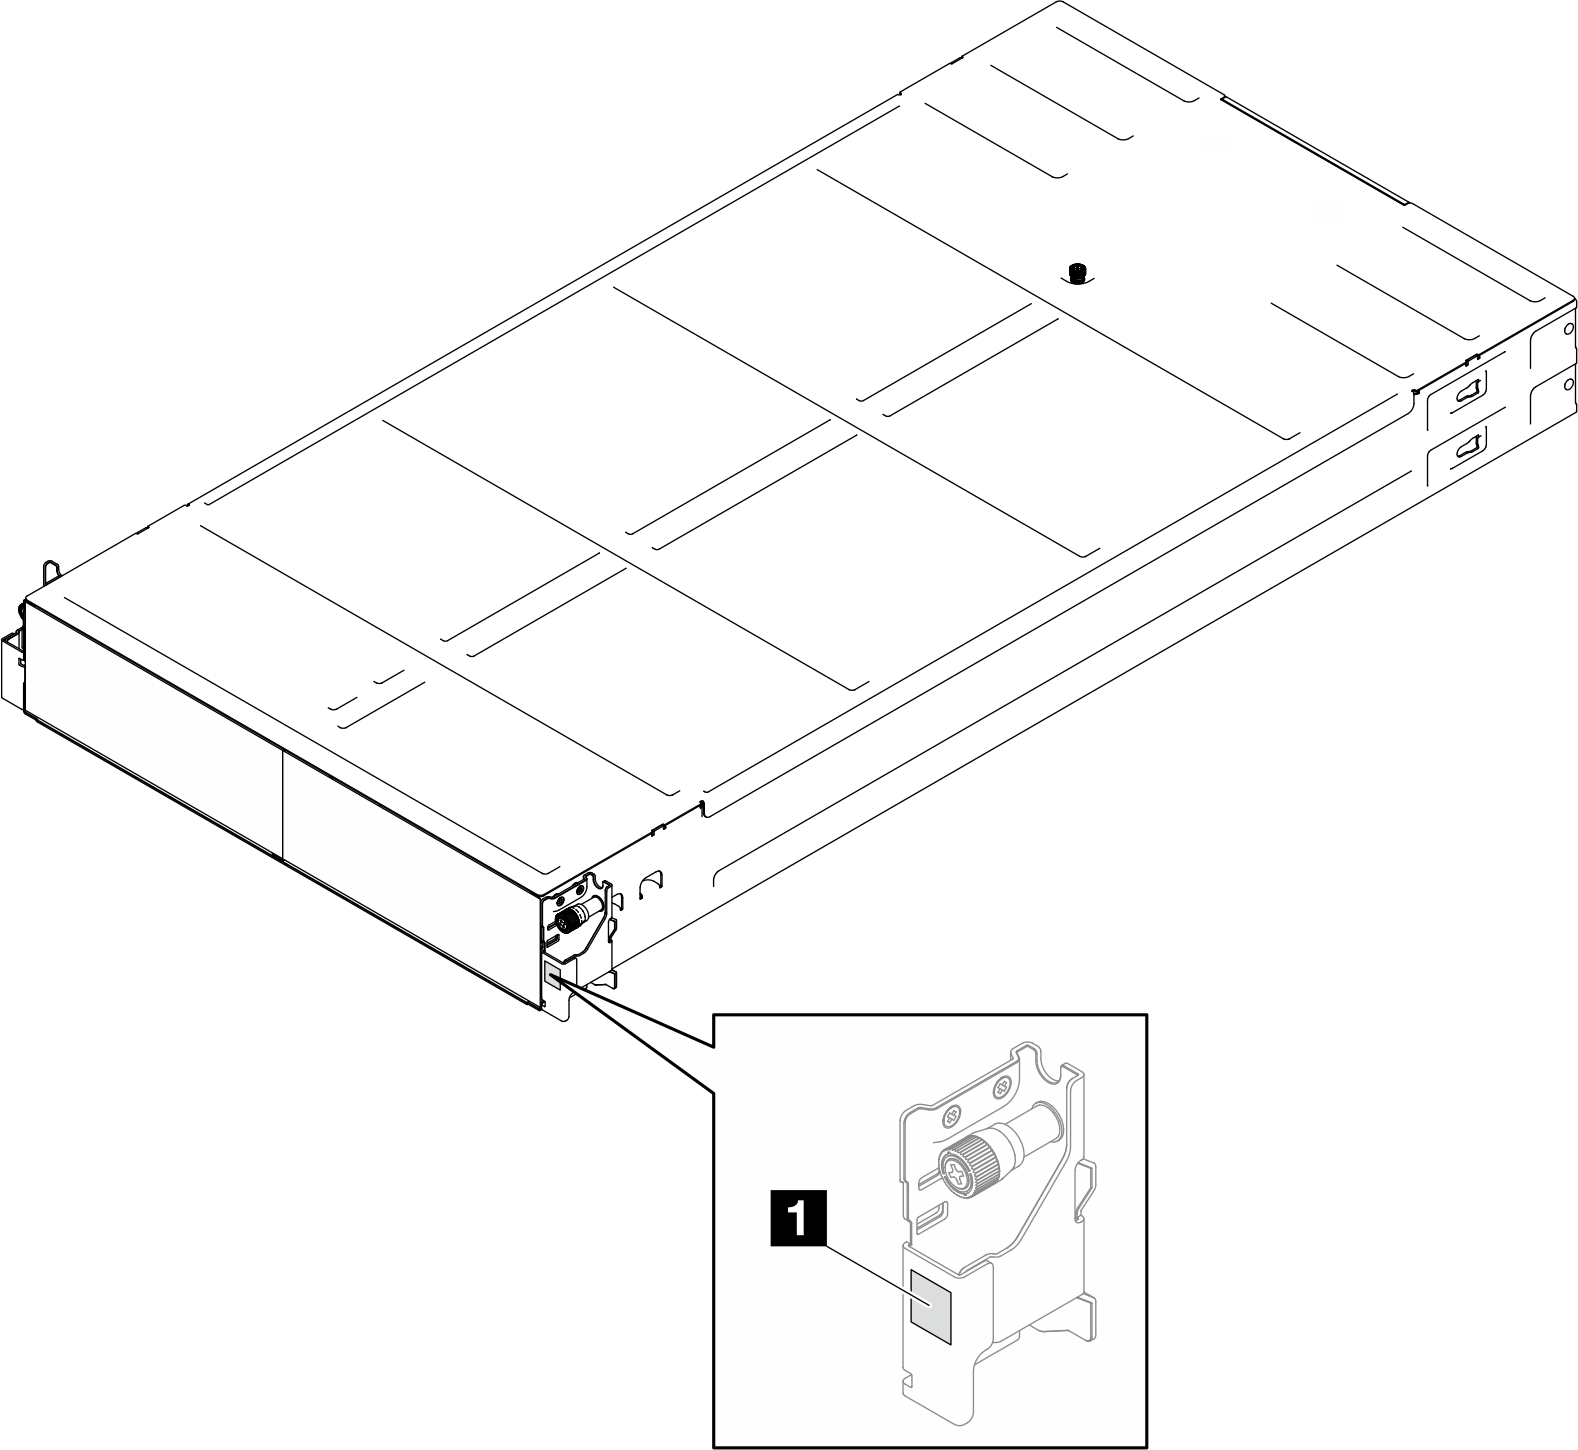 Location of the ID label on the chassis